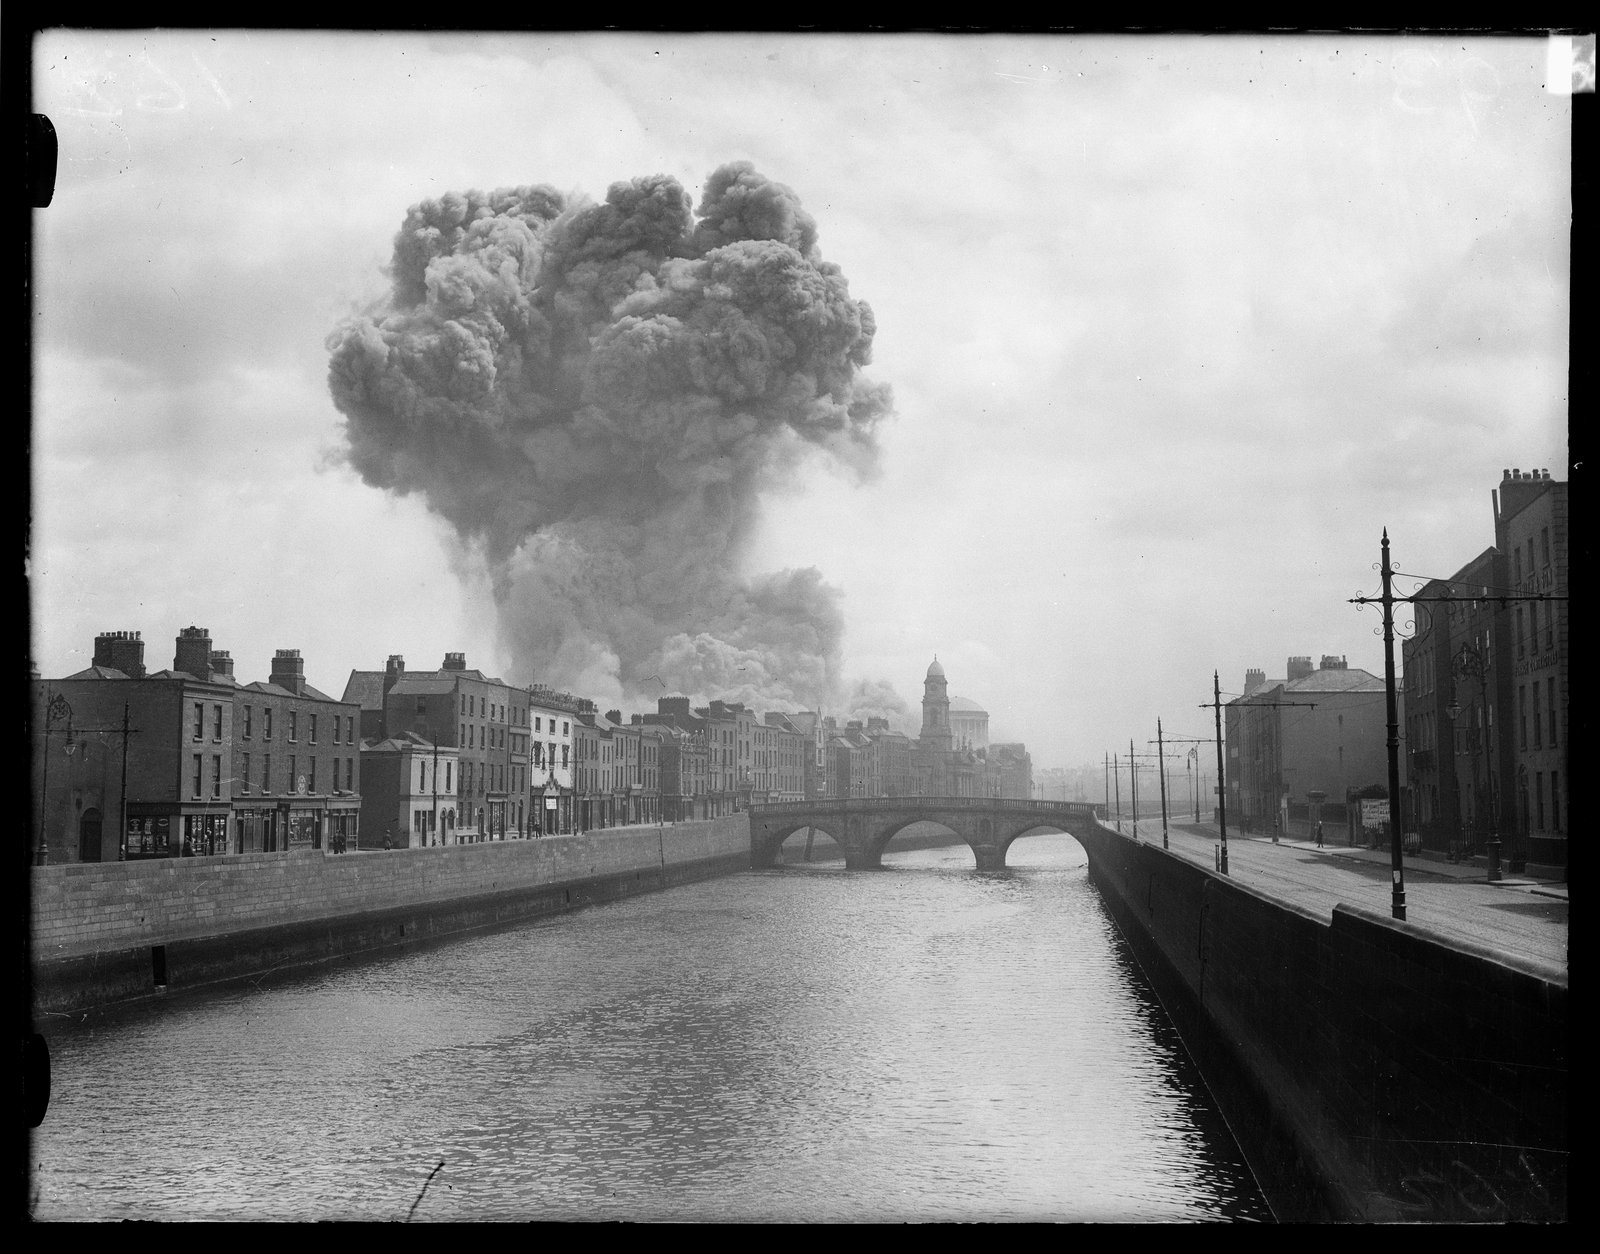 Image - The massive mushroom cloud generated by the detonation of mines and explosives at the height of the assault (Credit: RTÉ Cashman Collection)